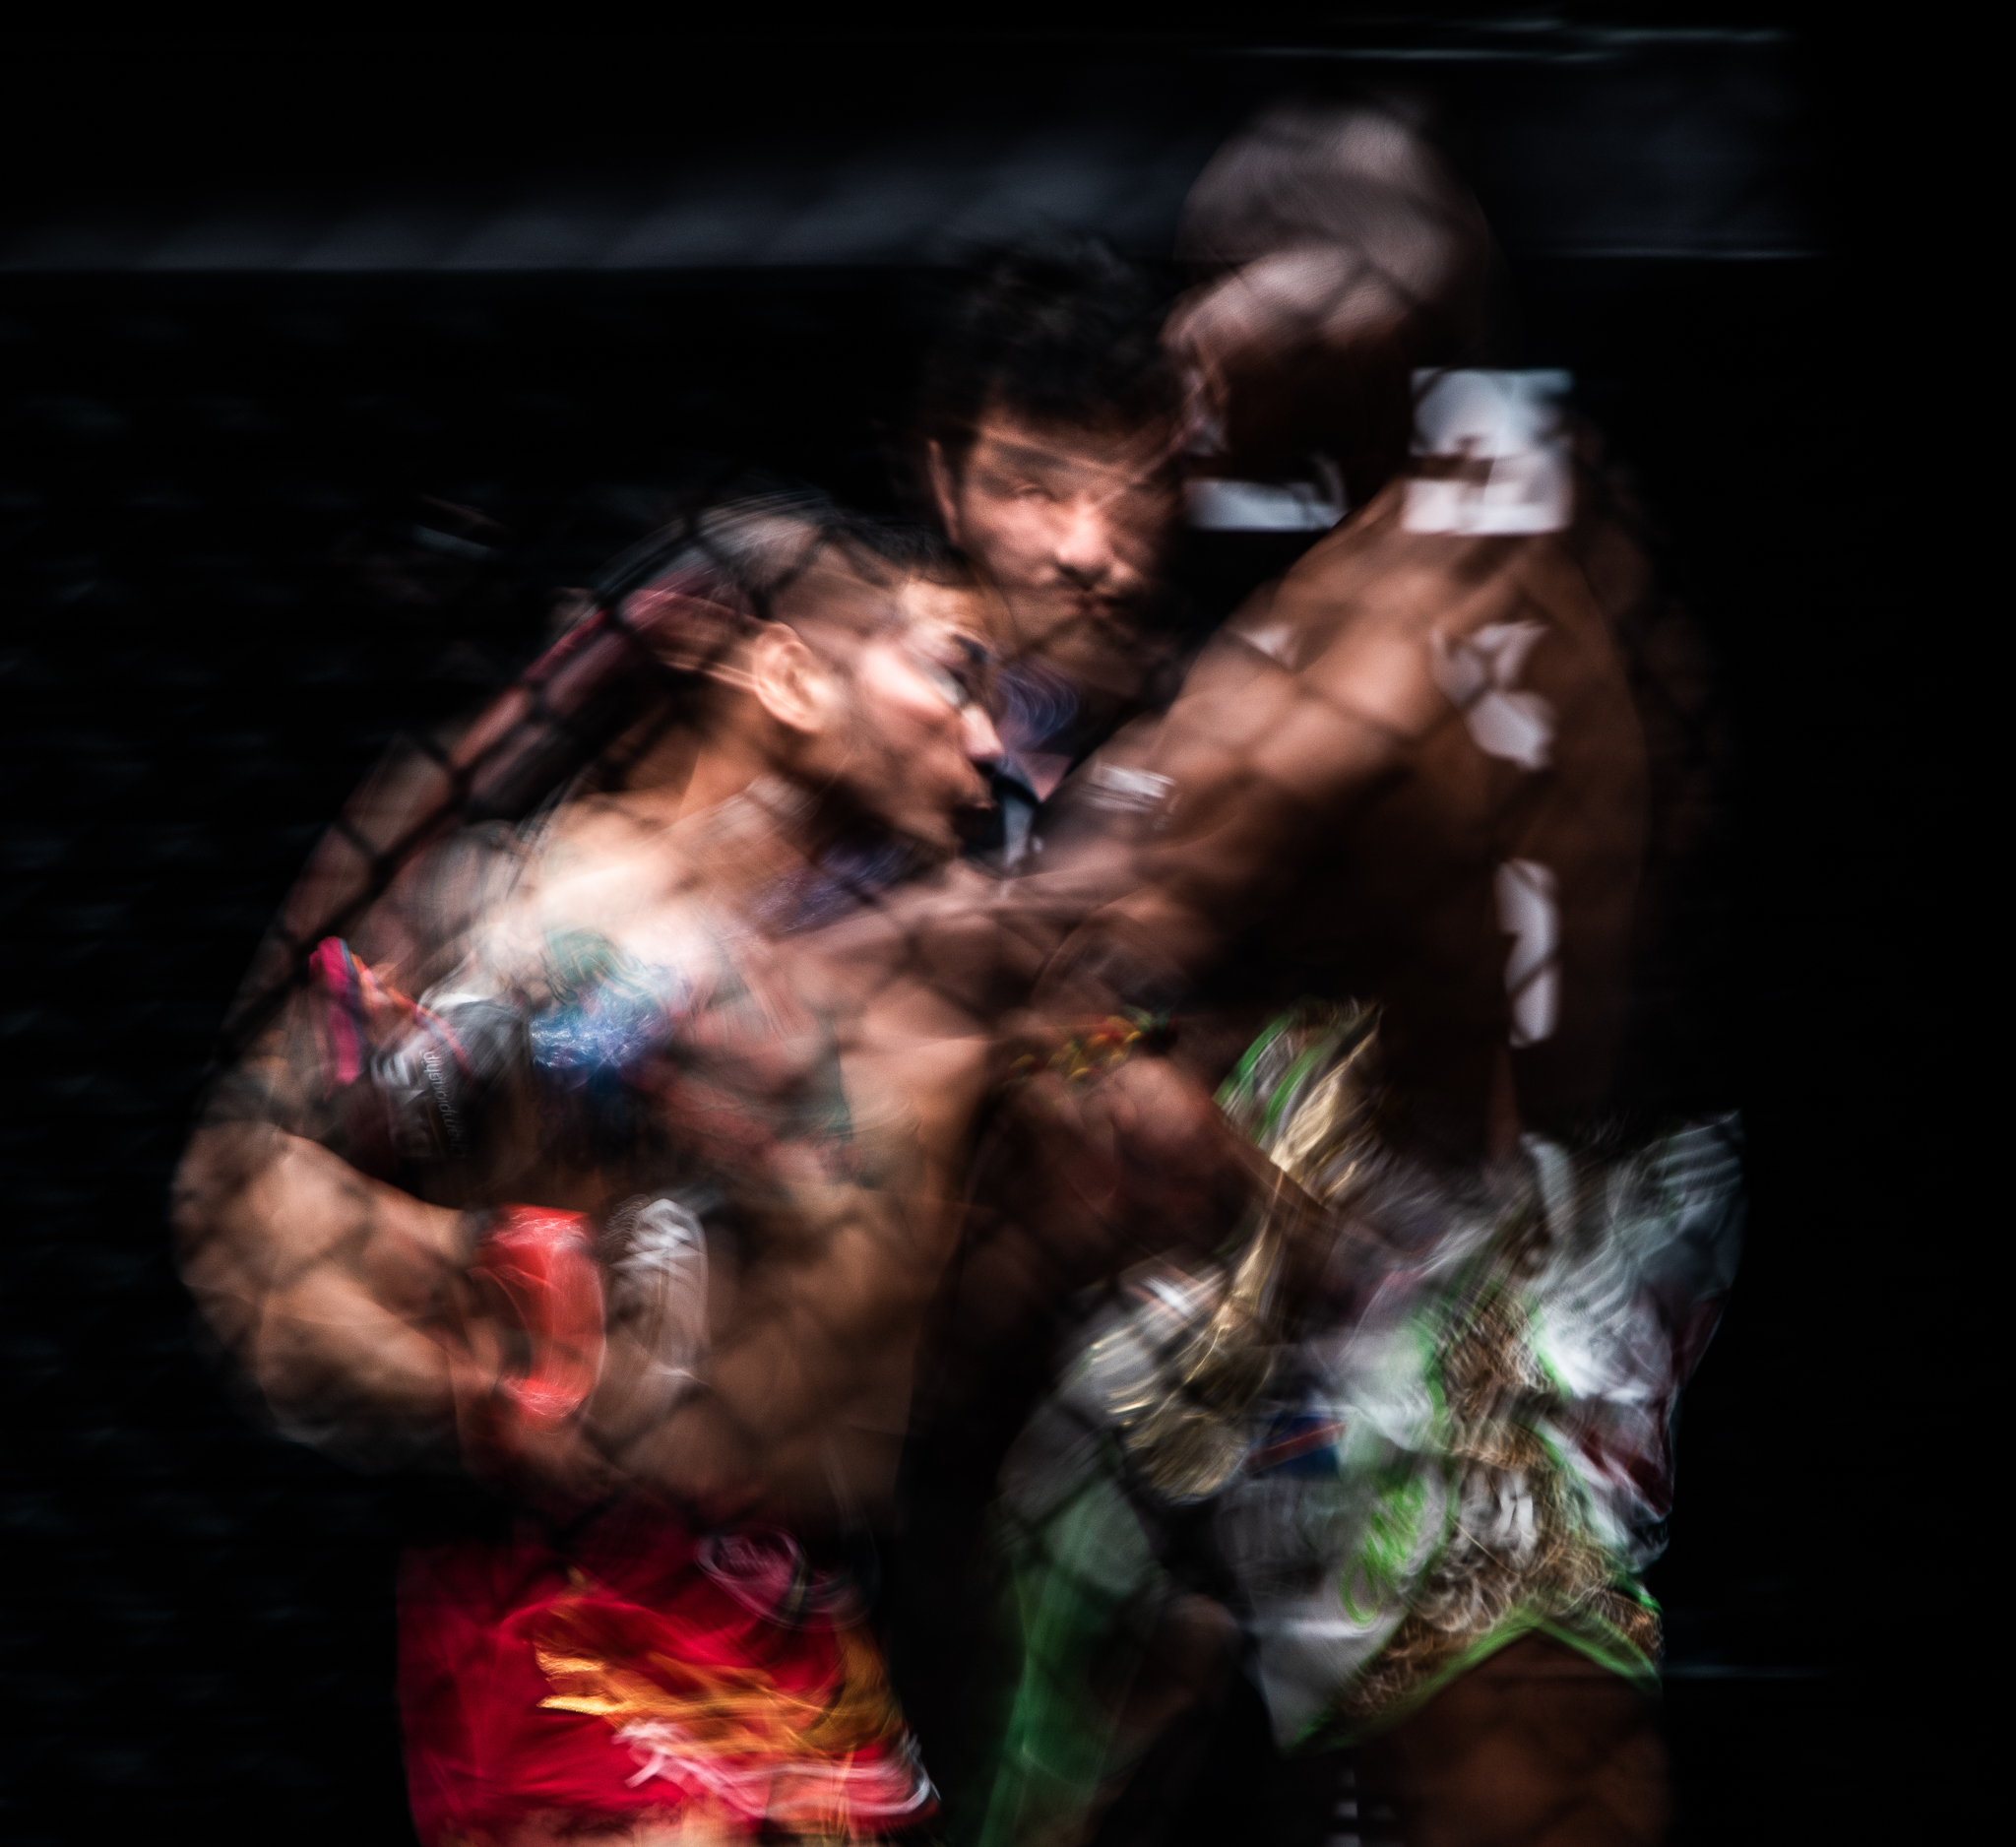 Thai and Congolese kickboxers exchange blows as the referee watches on during a One Championship World Title match at the Singapore Indoor Stadium.